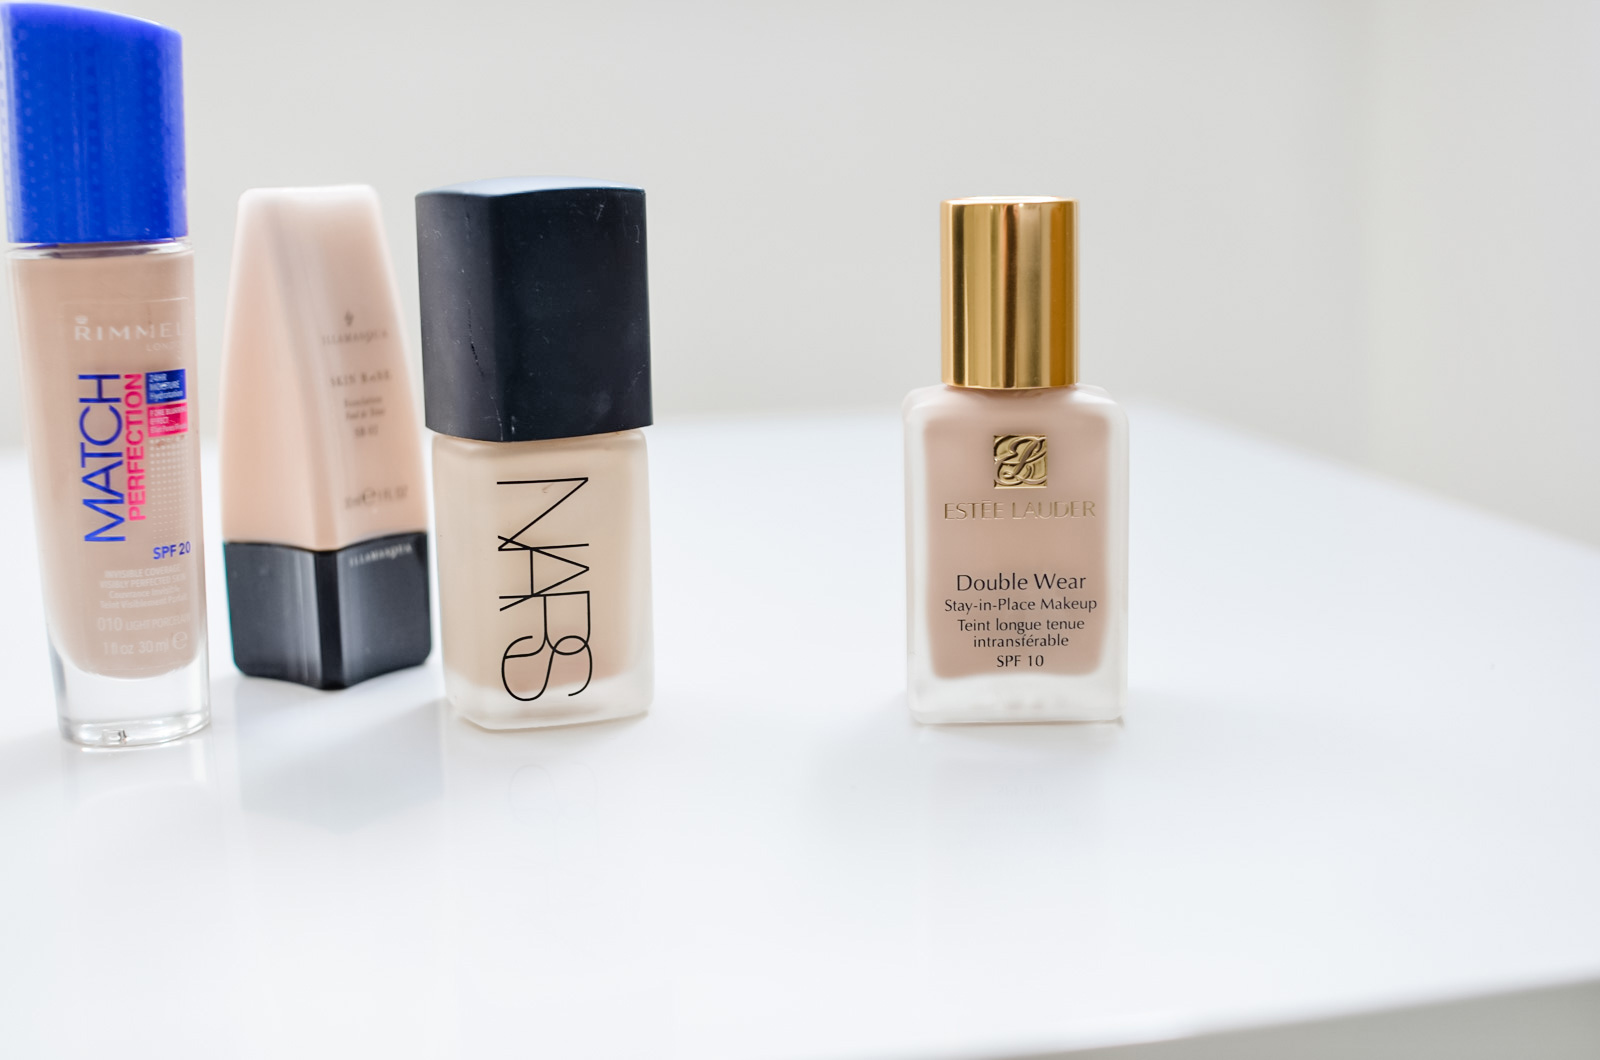 A range of foundations for pale skin, all swatched and compared to each other - which is the best for fair skin?